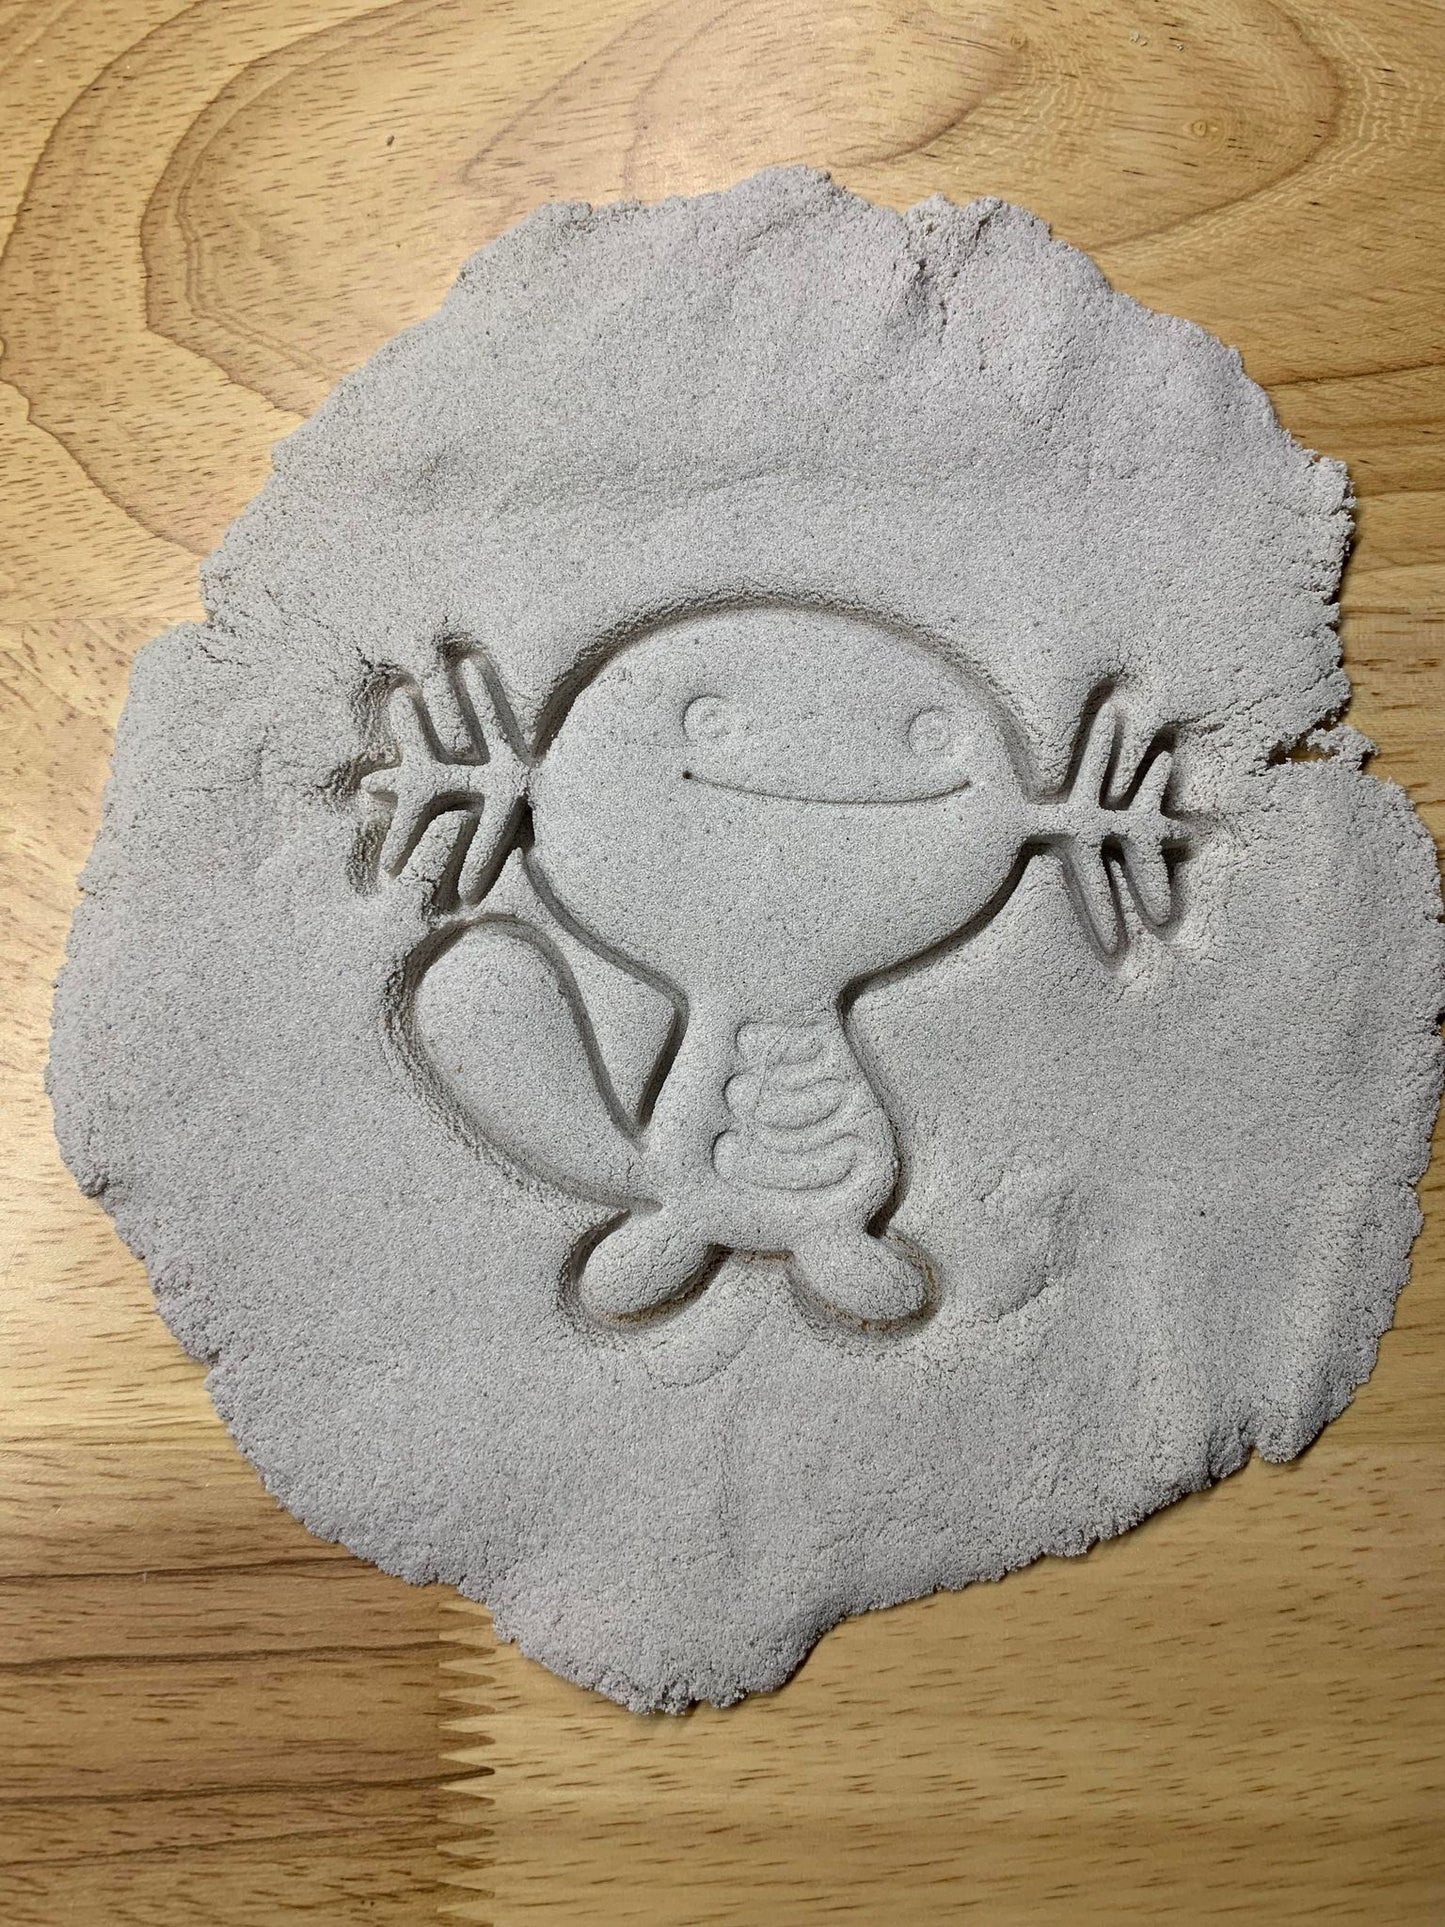 Wooper Pokemon Cookie Cutter #1 | polymer clay dough cutter clay shape jewelry cutters